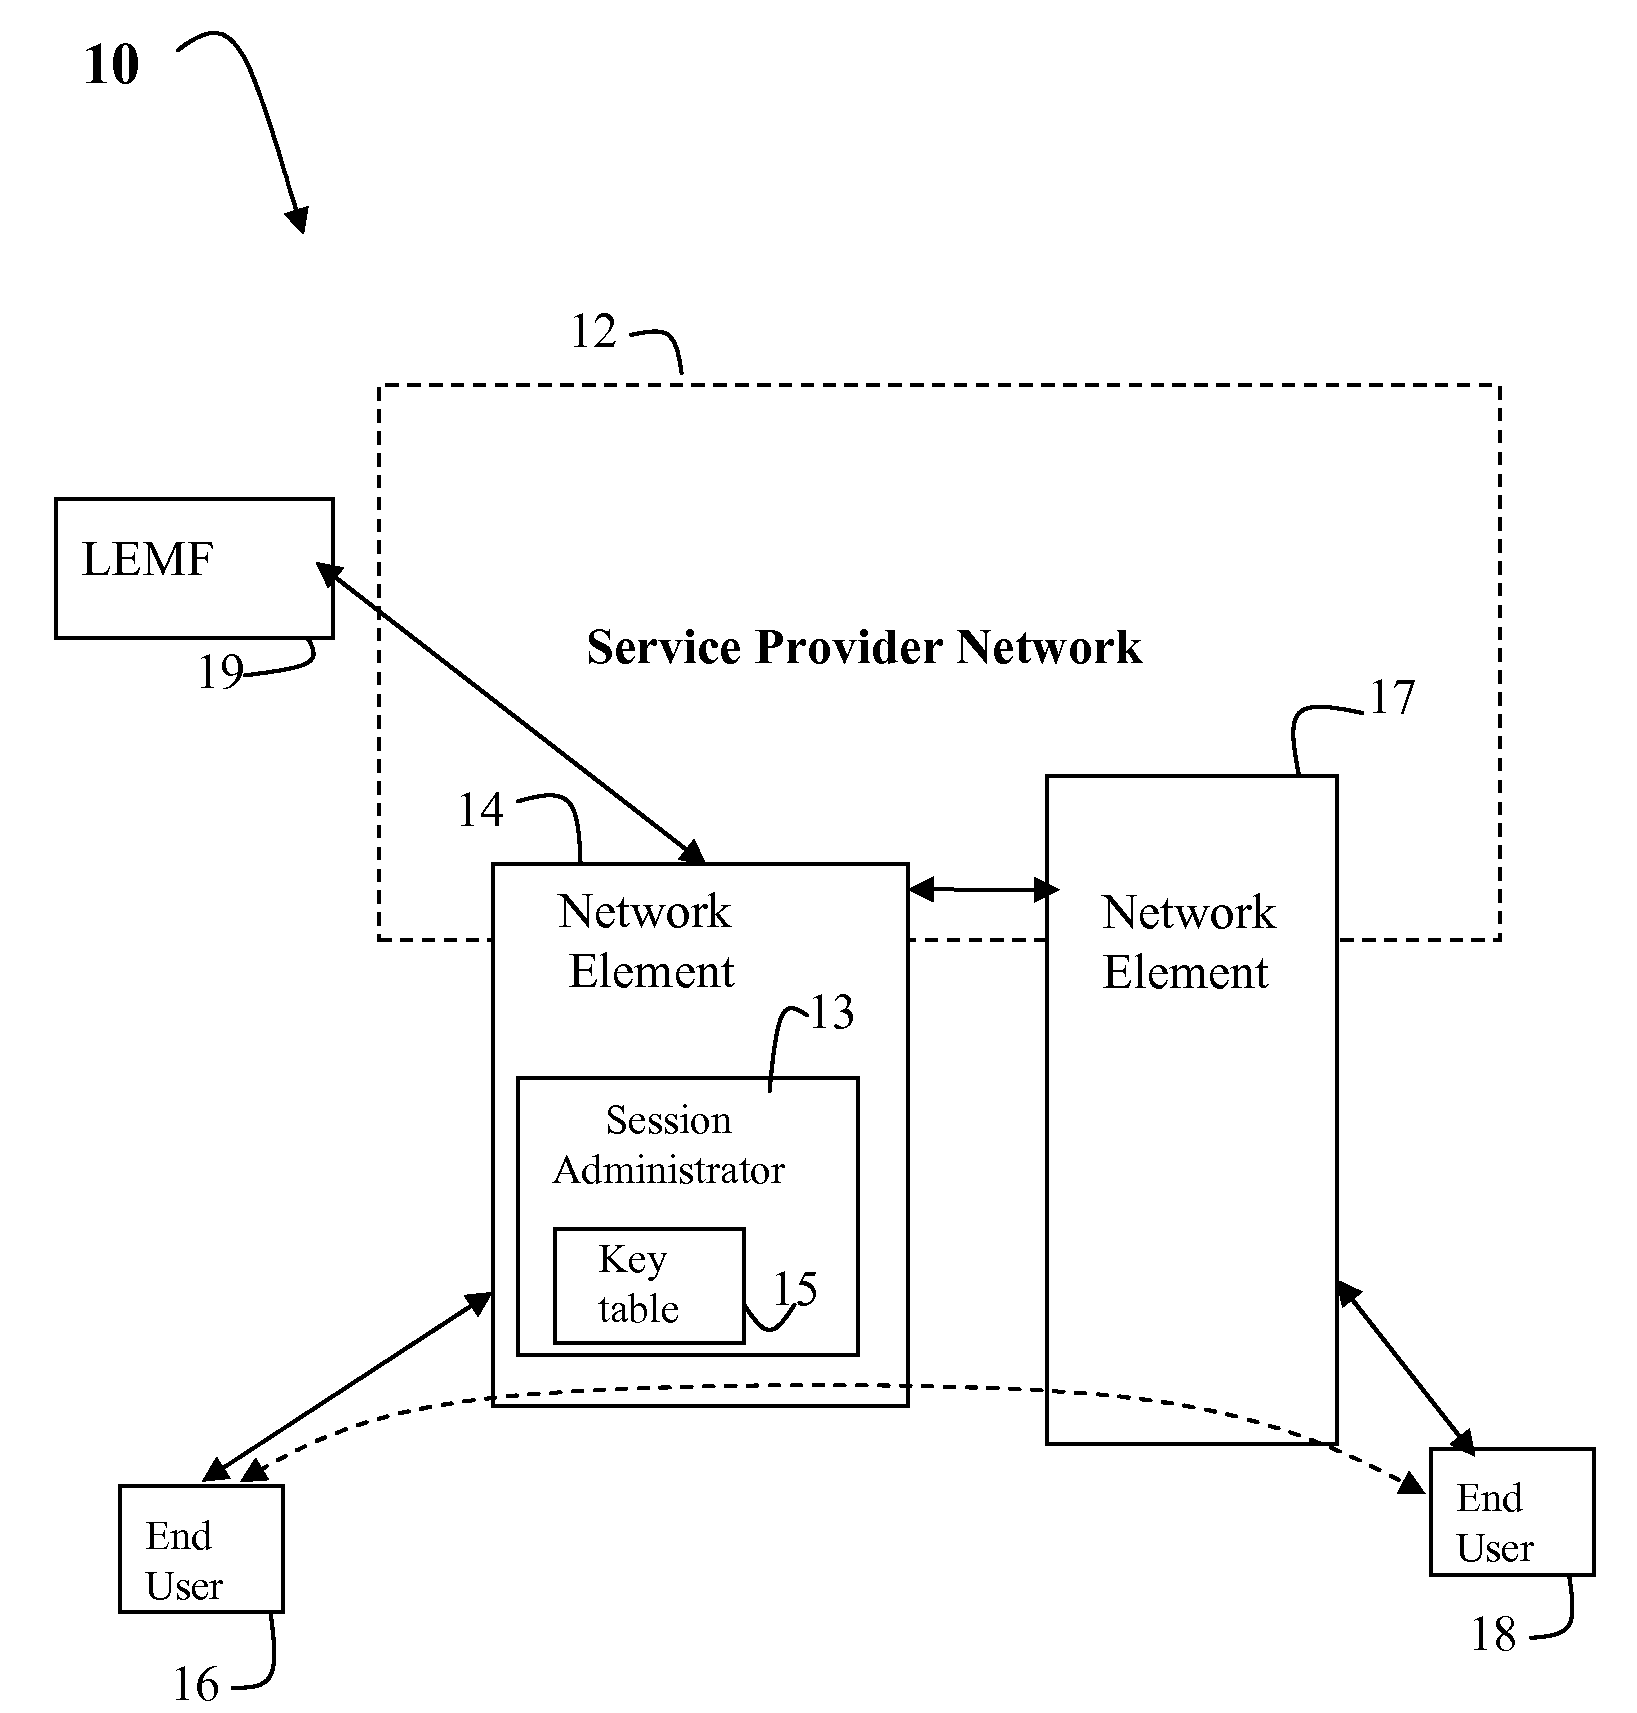 Method and Apparatus for Identifying and Monitoring VOIP Media Plane Security Keys for Service Provider Lawful Intercept Use